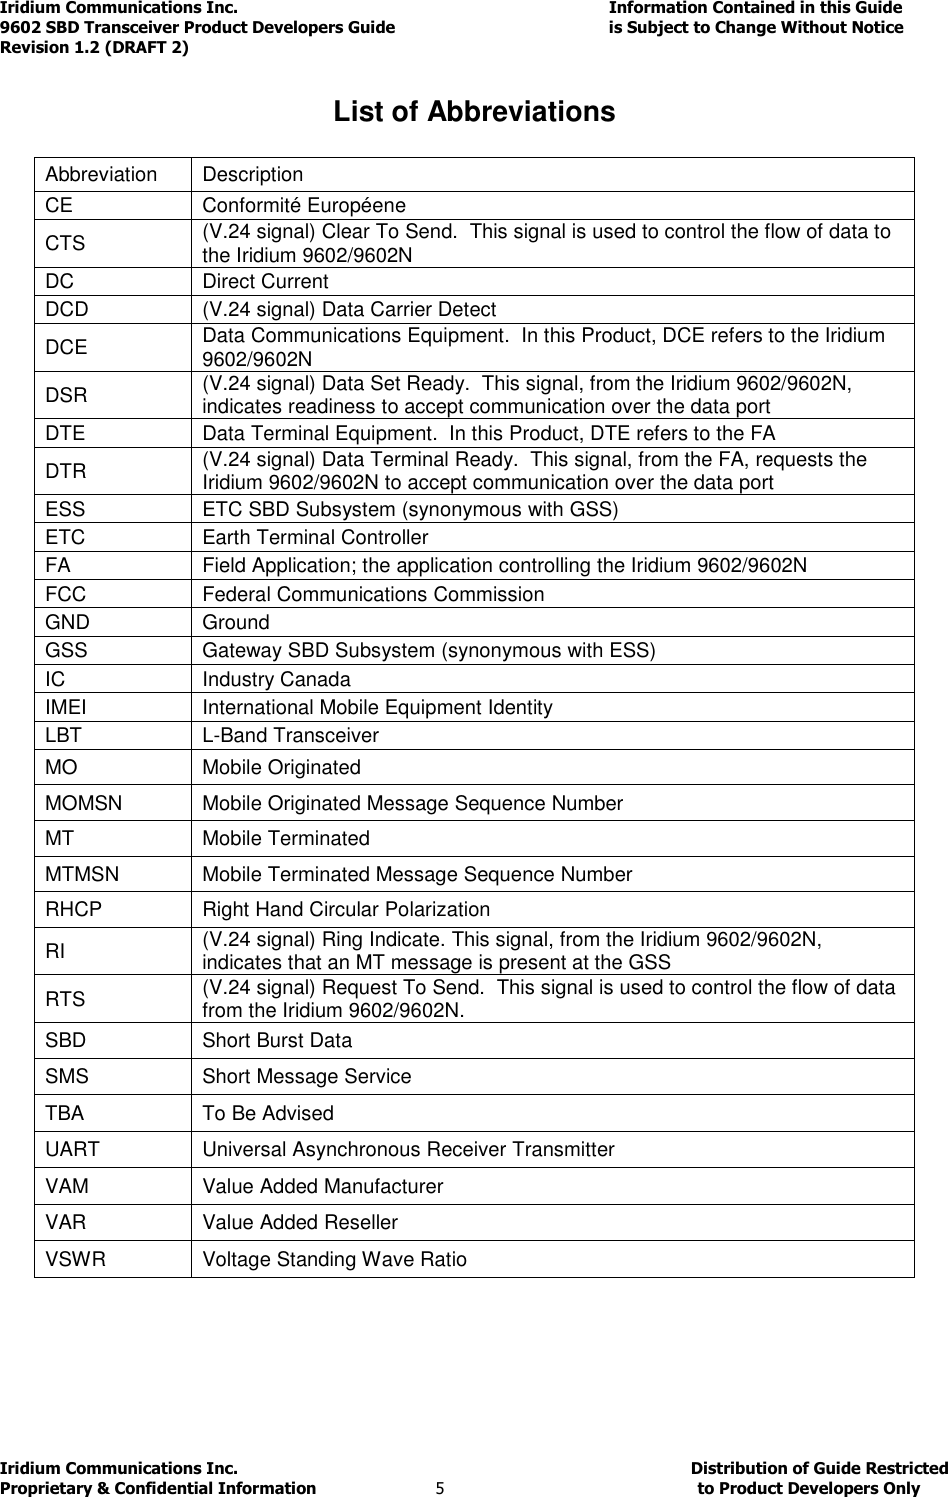 Iridium Communications Inc.                                      Information Contained in this Guide  9602 SBD Transceiver Product Developers Guide                                             is Subject to Change Without Notice  Revision 1.2 (DRAFT 2) Iridium Communications Inc.                                           Distribution of Guide Restricted Proprietary &amp; Confidential Information                         5                                                  to Product Developers Only           List of Abbreviations  Abbreviation  Description CE  Conformité Européene CTS  (V.24 signal) Clear To Send.  This signal is used to control the flow of data to the Iridium 9602/9602N DC  Direct Current DCD  (V.24 signal) Data Carrier Detect DCE  Data Communications Equipment.  In this Product, DCE refers to the Iridium 9602/9602N DSR  (V.24 signal) Data Set Ready.  This signal, from the Iridium 9602/9602N, indicates readiness to accept communication over the data port DTE  Data Terminal Equipment.  In this Product, DTE refers to the FA DTR  (V.24 signal) Data Terminal Ready.  This signal, from the FA, requests the Iridium 9602/9602N to accept communication over the data port ESS  ETC SBD Subsystem (synonymous with GSS) ETC  Earth Terminal Controller FA  Field Application; the application controlling the Iridium 9602/9602N FCC  Federal Communications Commission GND  Ground GSS  Gateway SBD Subsystem (synonymous with ESS) IC  Industry Canada IMEI  International Mobile Equipment Identity LBT  L-Band Transceiver MO  Mobile Originated MOMSN  Mobile Originated Message Sequence Number MT  Mobile Terminated MTMSN  Mobile Terminated Message Sequence Number RHCP  Right Hand Circular Polarization  RI  (V.24 signal) Ring Indicate. This signal, from the Iridium 9602/9602N, indicates that an MT message is present at the GSS RTS  (V.24 signal) Request To Send.  This signal is used to control the flow of data from the Iridium 9602/9602N. SBD  Short Burst Data SMS  Short Message Service TBA  To Be Advised UART  Universal Asynchronous Receiver Transmitter VAM  Value Added Manufacturer VAR  Value Added Reseller VSWR  Voltage Standing Wave Ratio   